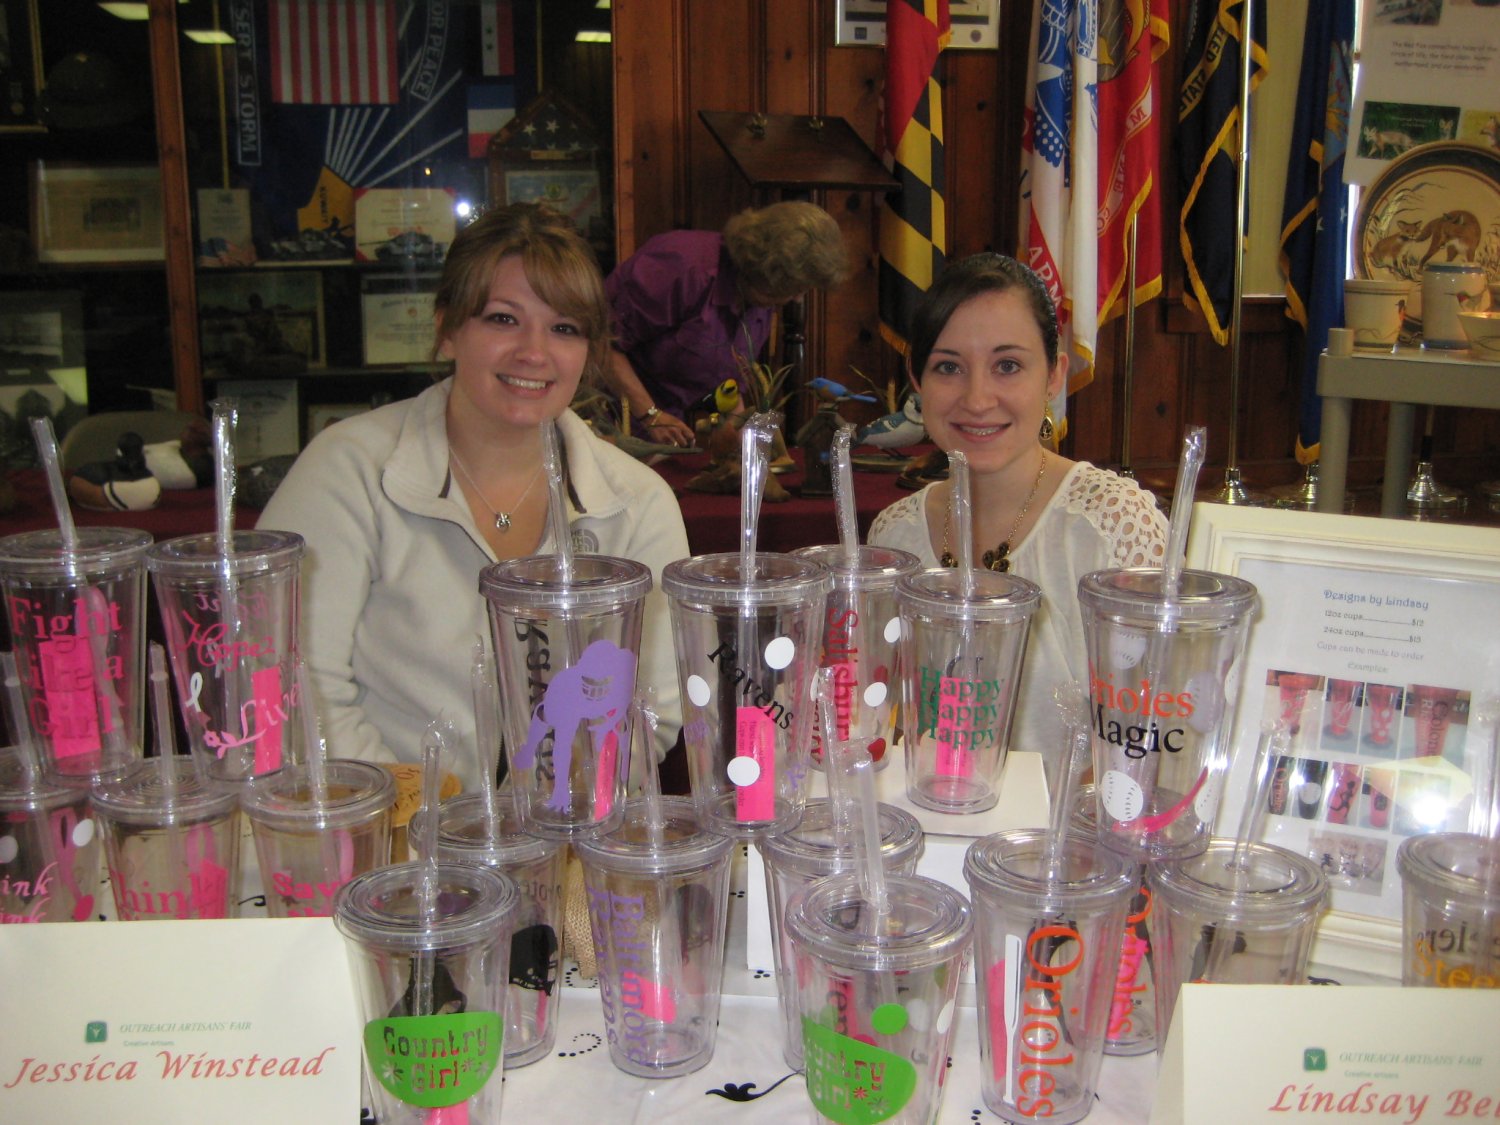  Jessica Winstead sold handcrafted wreaths (not shown), and Lindsay&nbsp; Bell offered her handpainted tumblers.  